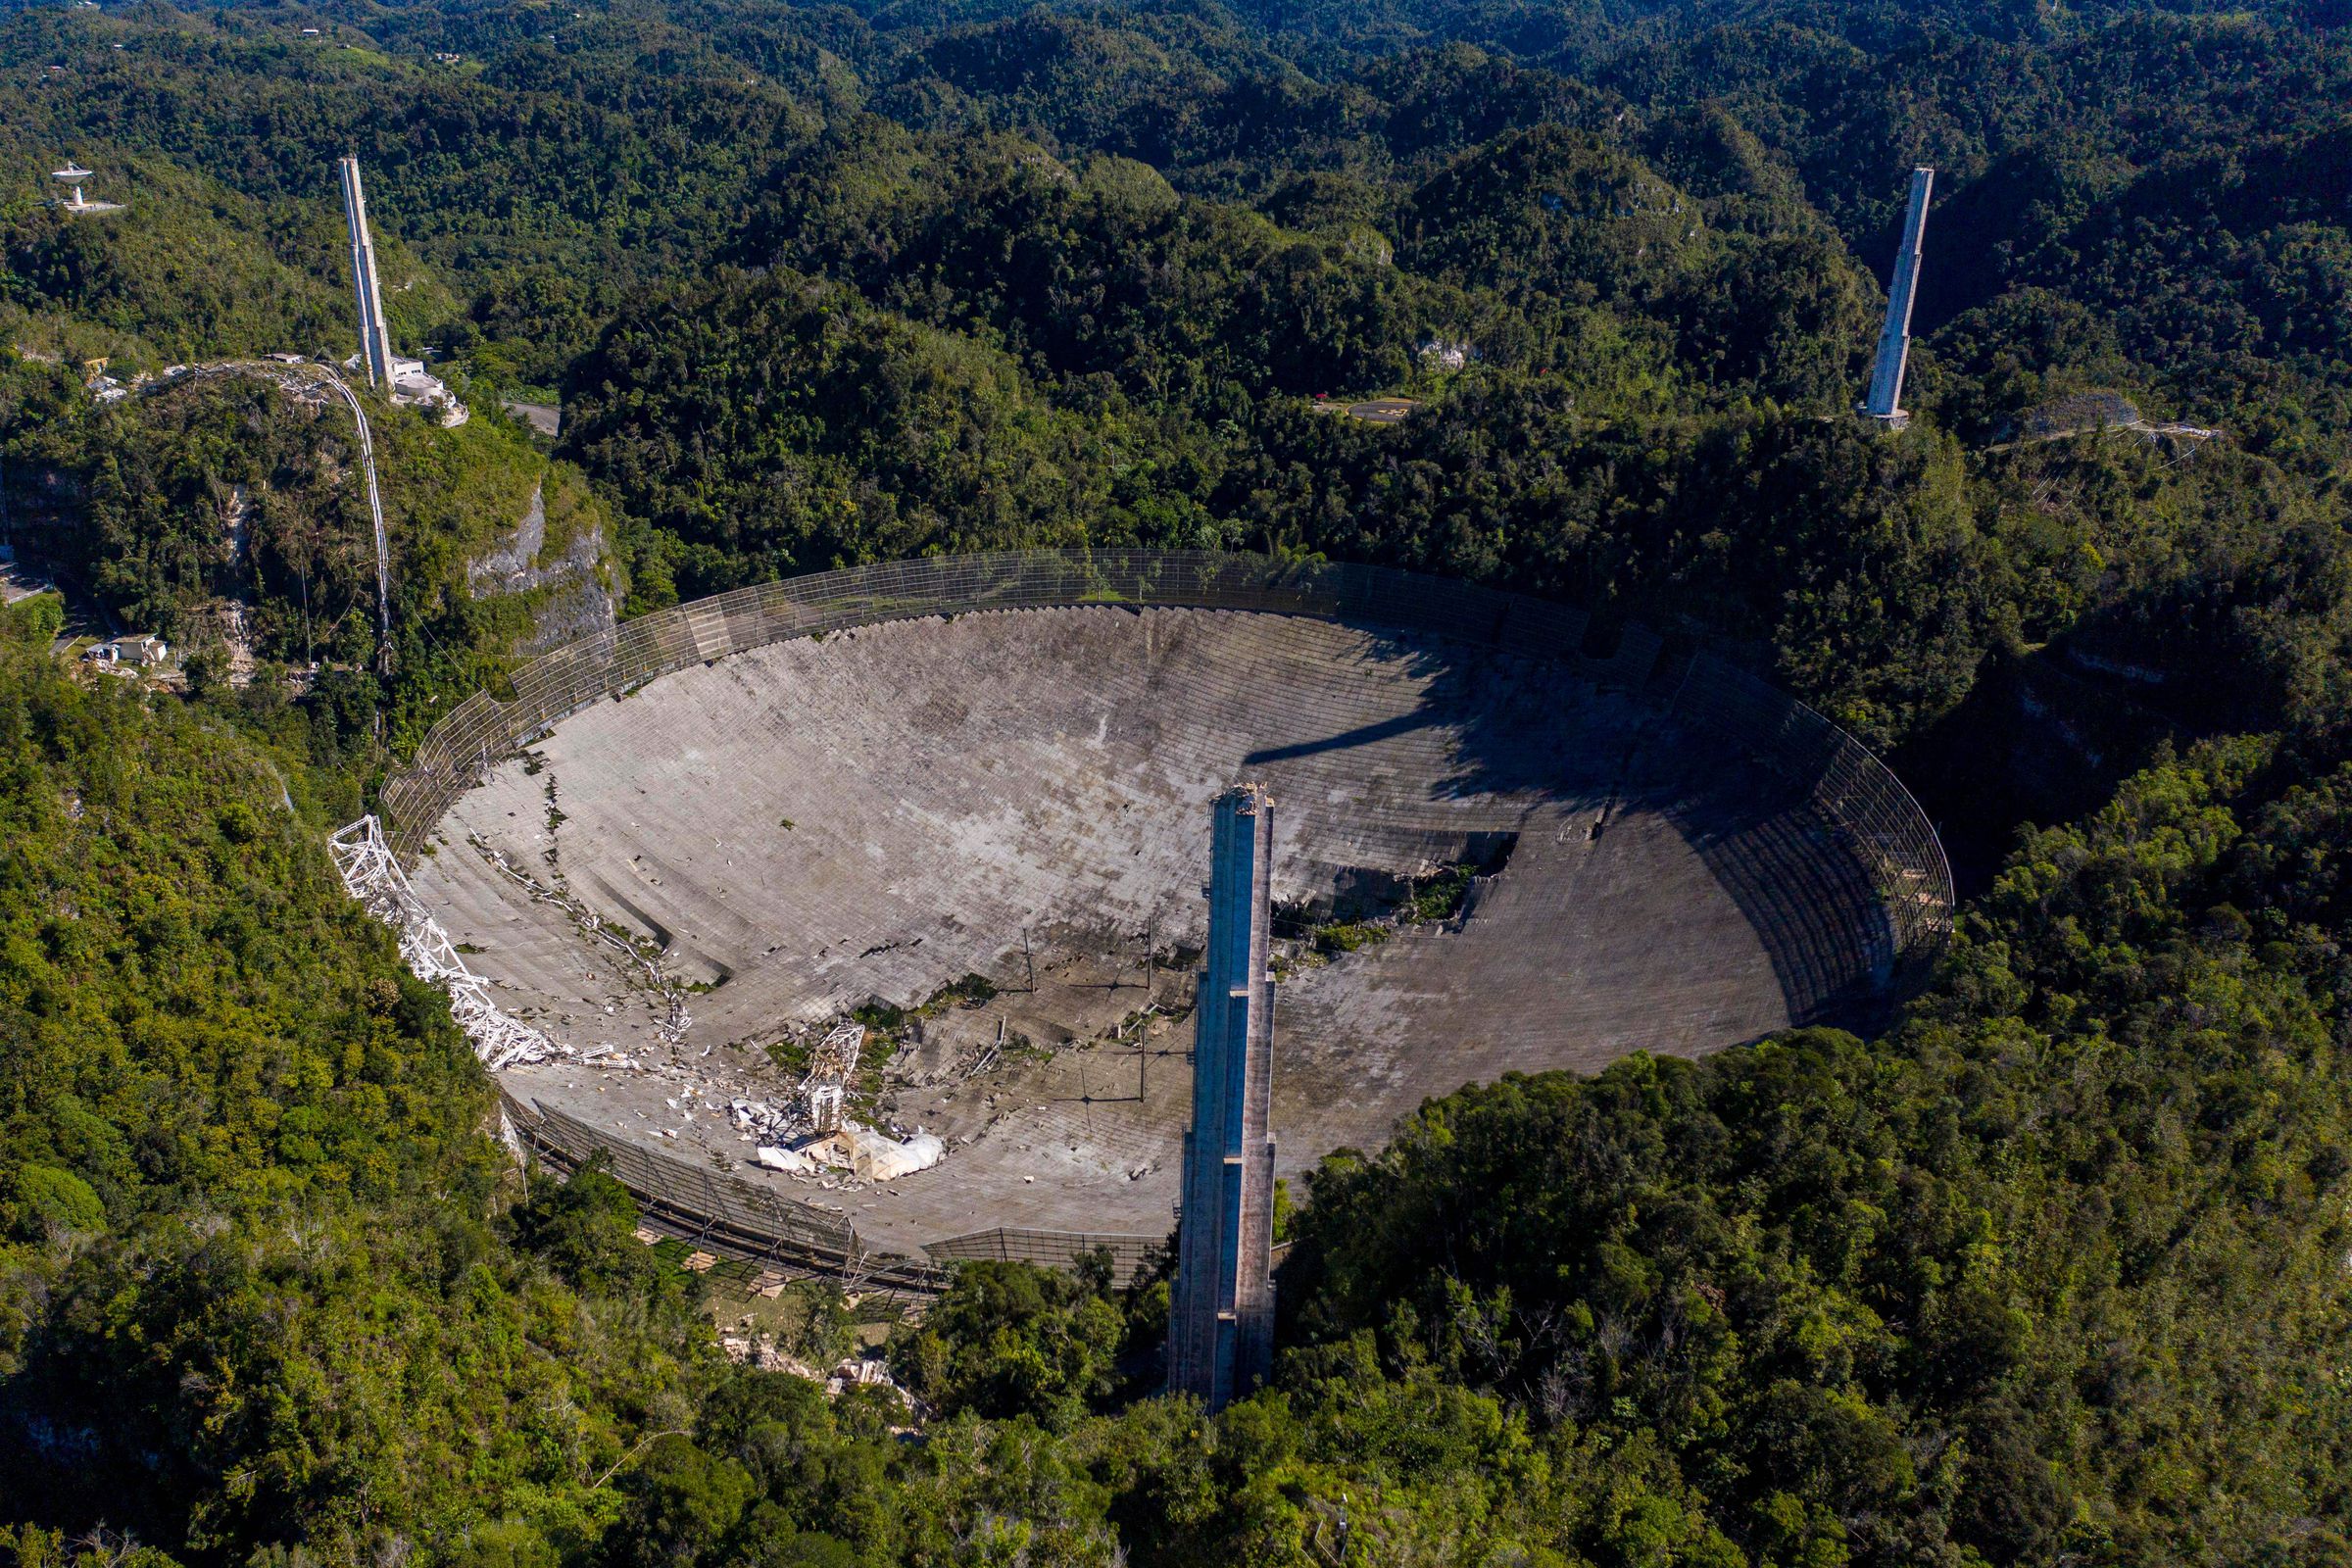 TOPSHOT-PUERTORICO-SCIENCE-ASTRONOMY-OBSERVATORY-US